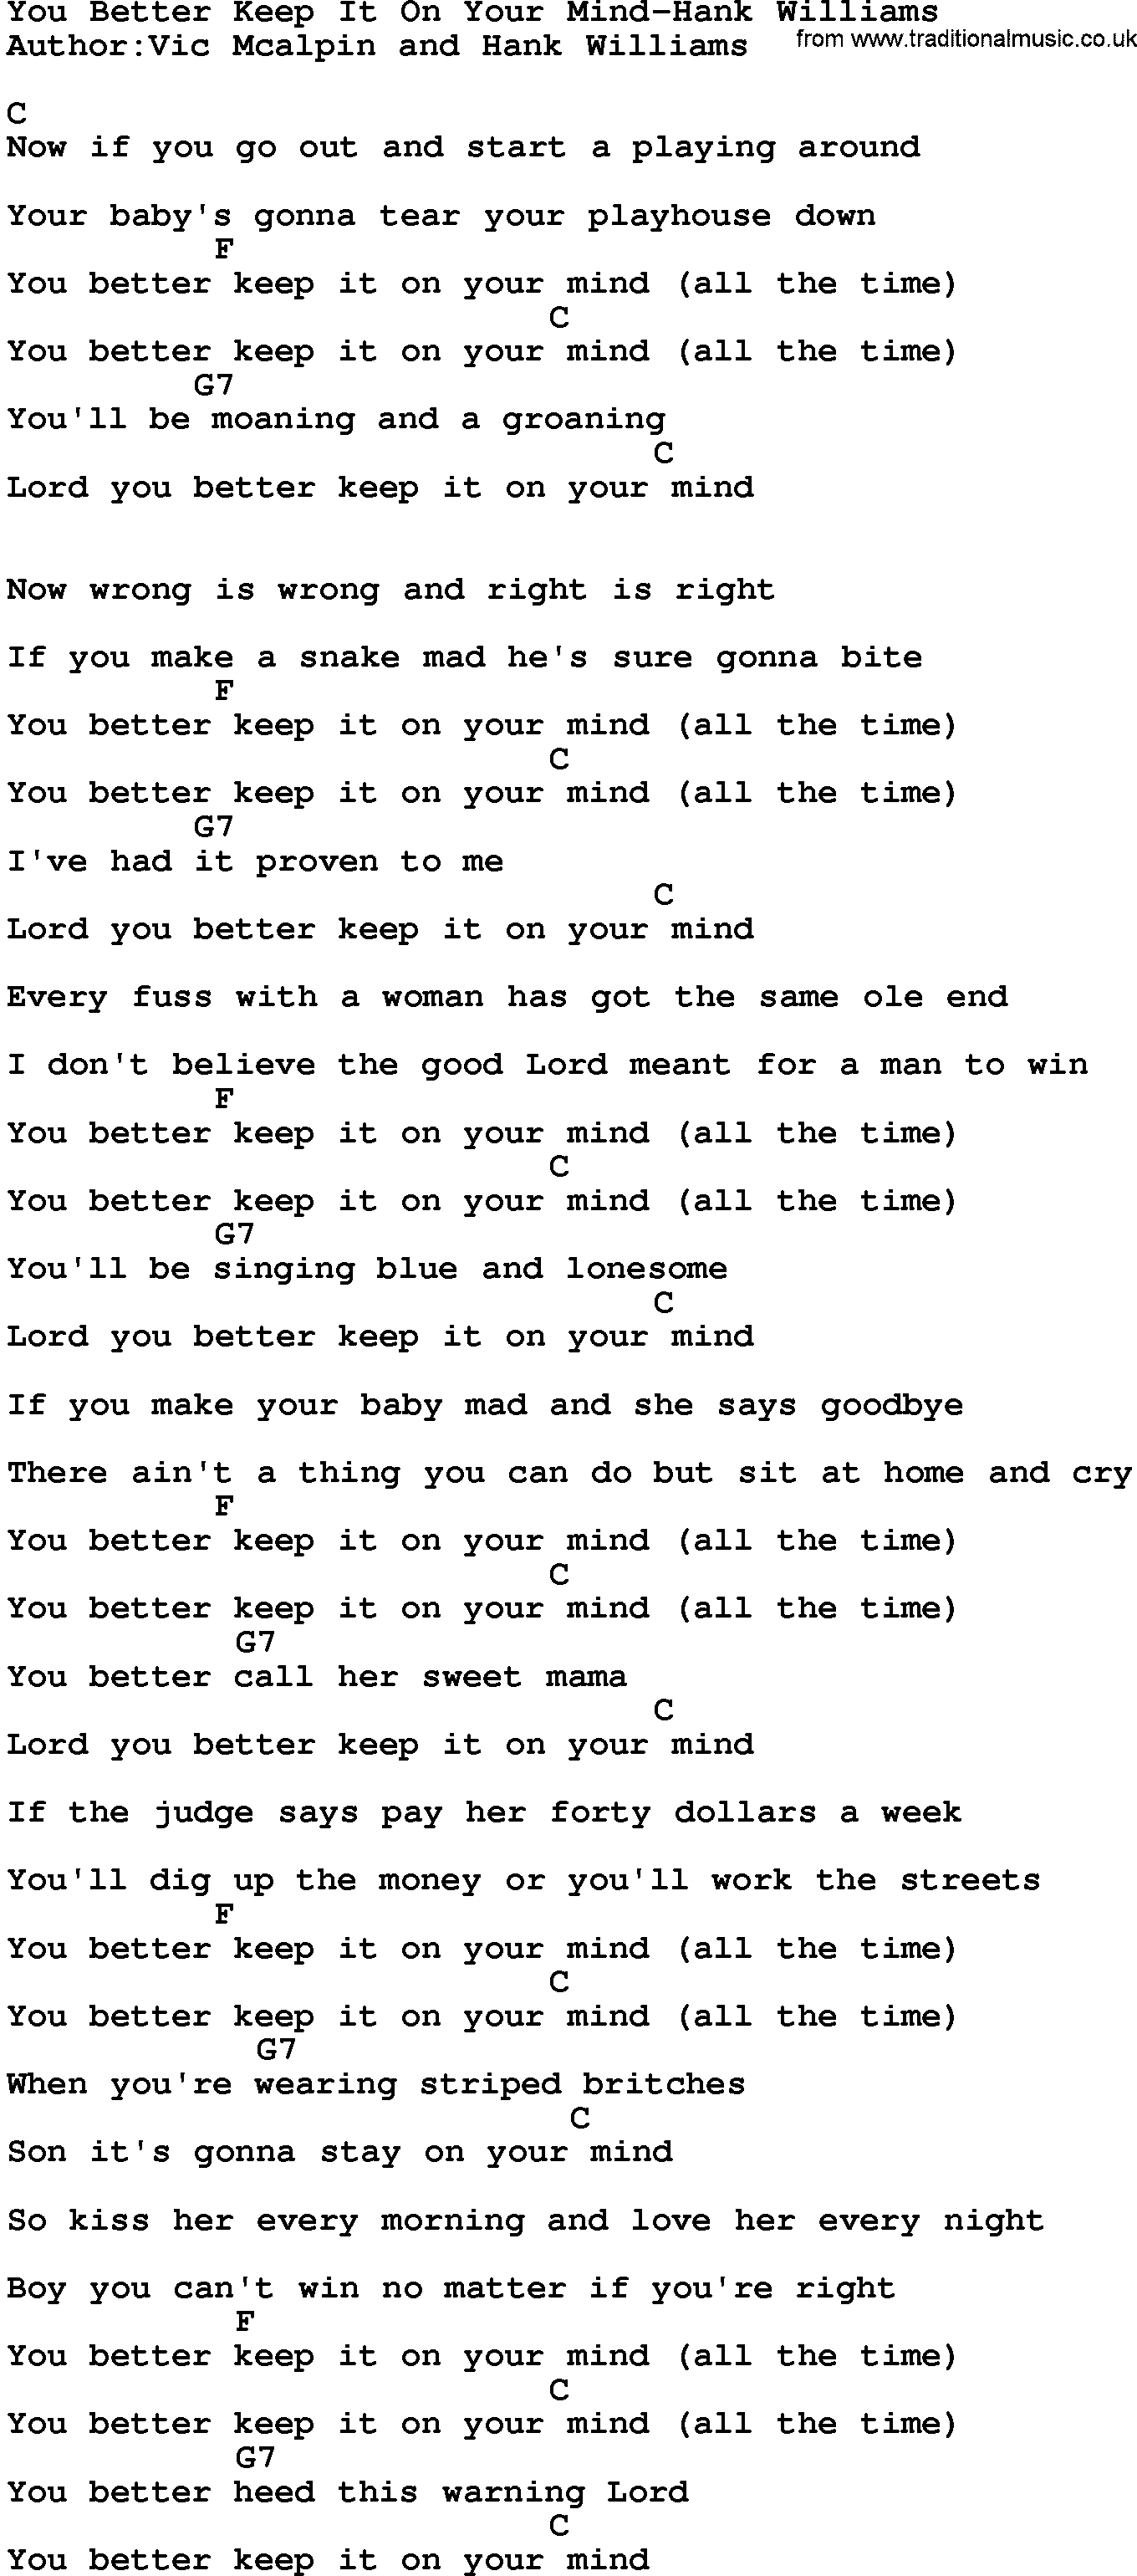 Country music song: You Better Keep It On Your Mind-Hank Williams lyrics and chords